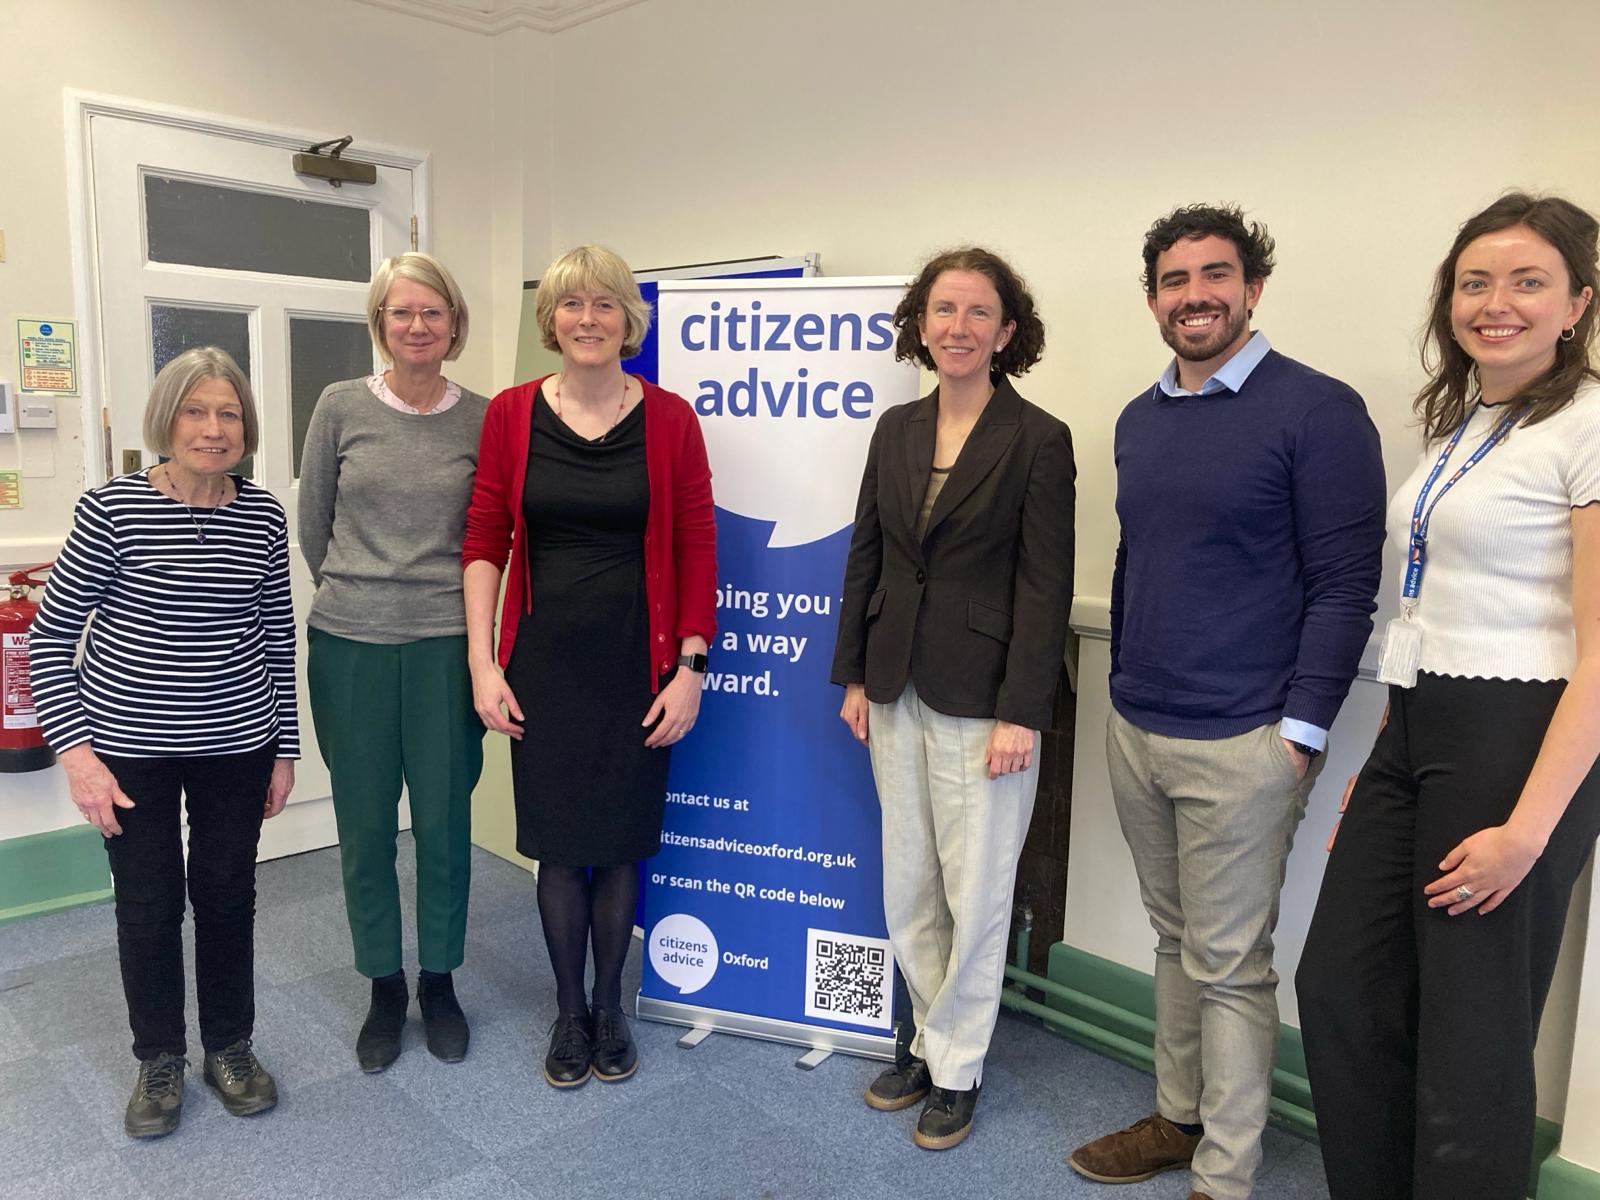 Photo of me with five staff from Citizens Advice, standing in front of a blue and white Citizens Advice roller banner